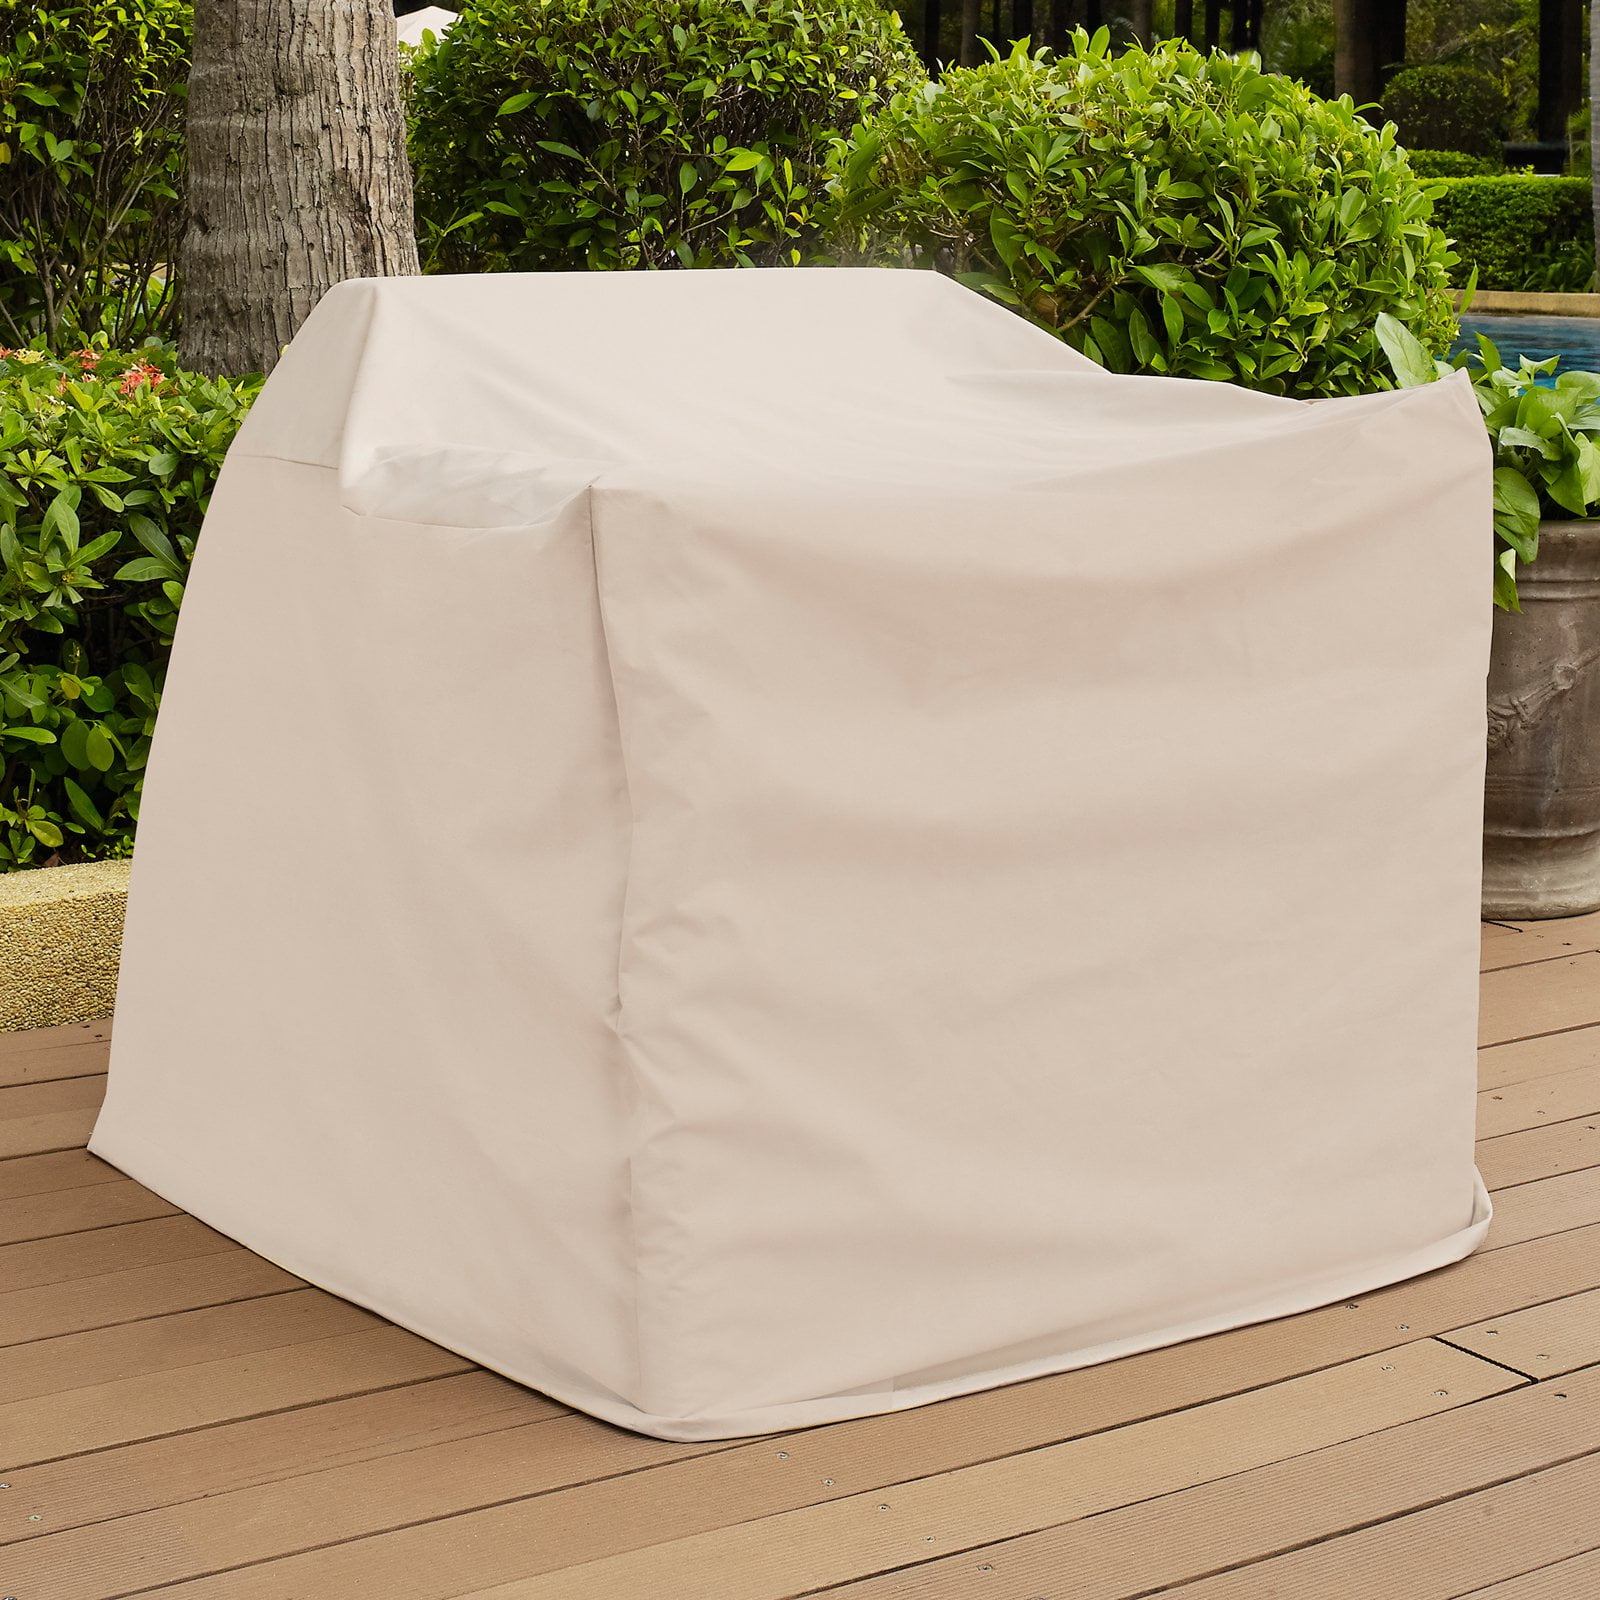 Waterproof Patio Chair Cover 28x31x40inch Heavy Duty Dust Rain Cover for Garden Yard Outdoor Patio Furniture Protective Cover w5bhj88 Chair Cover 1PCS 